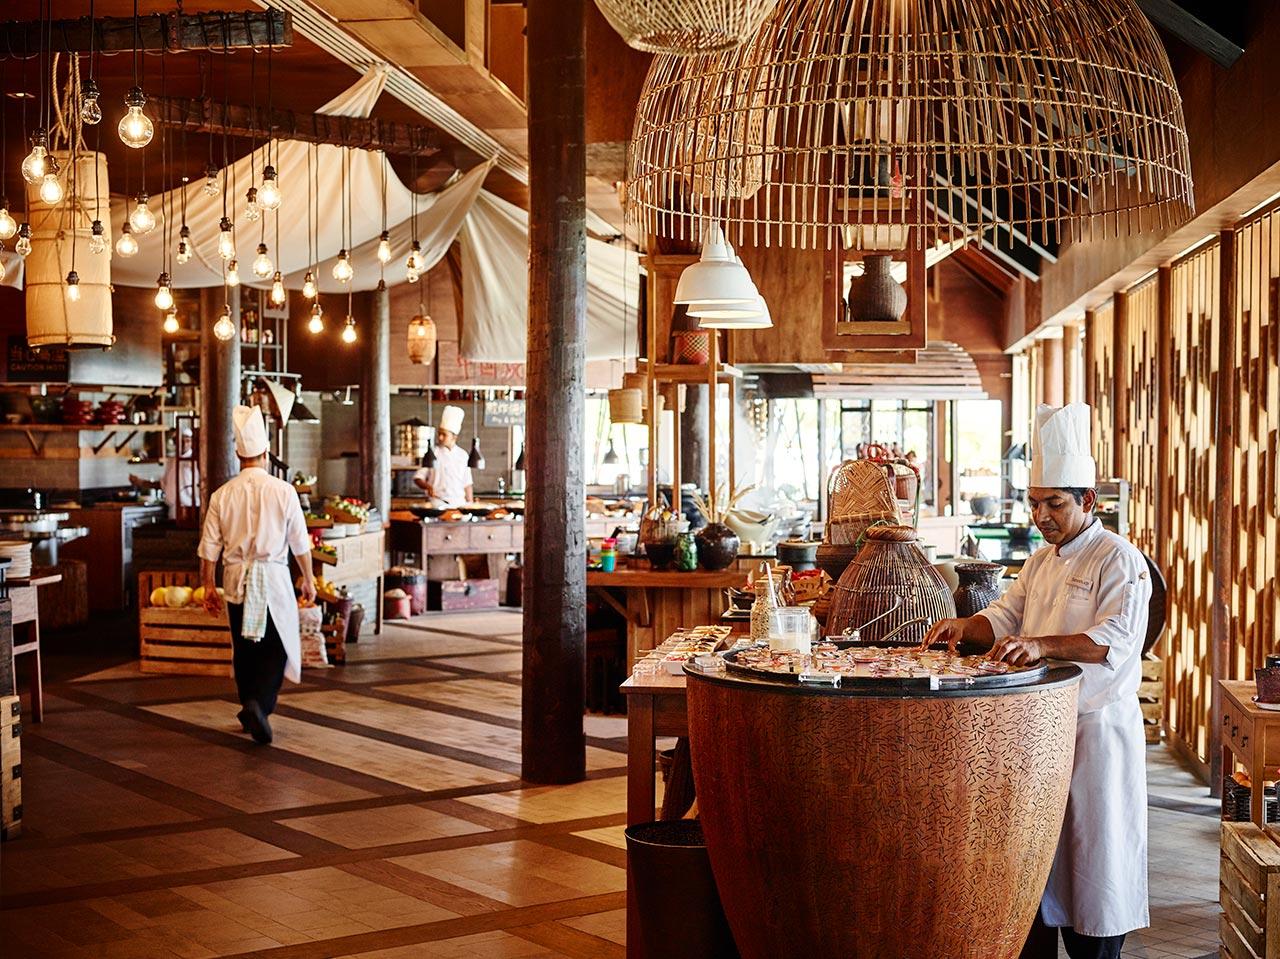 LUX South Ari Atoll Dining